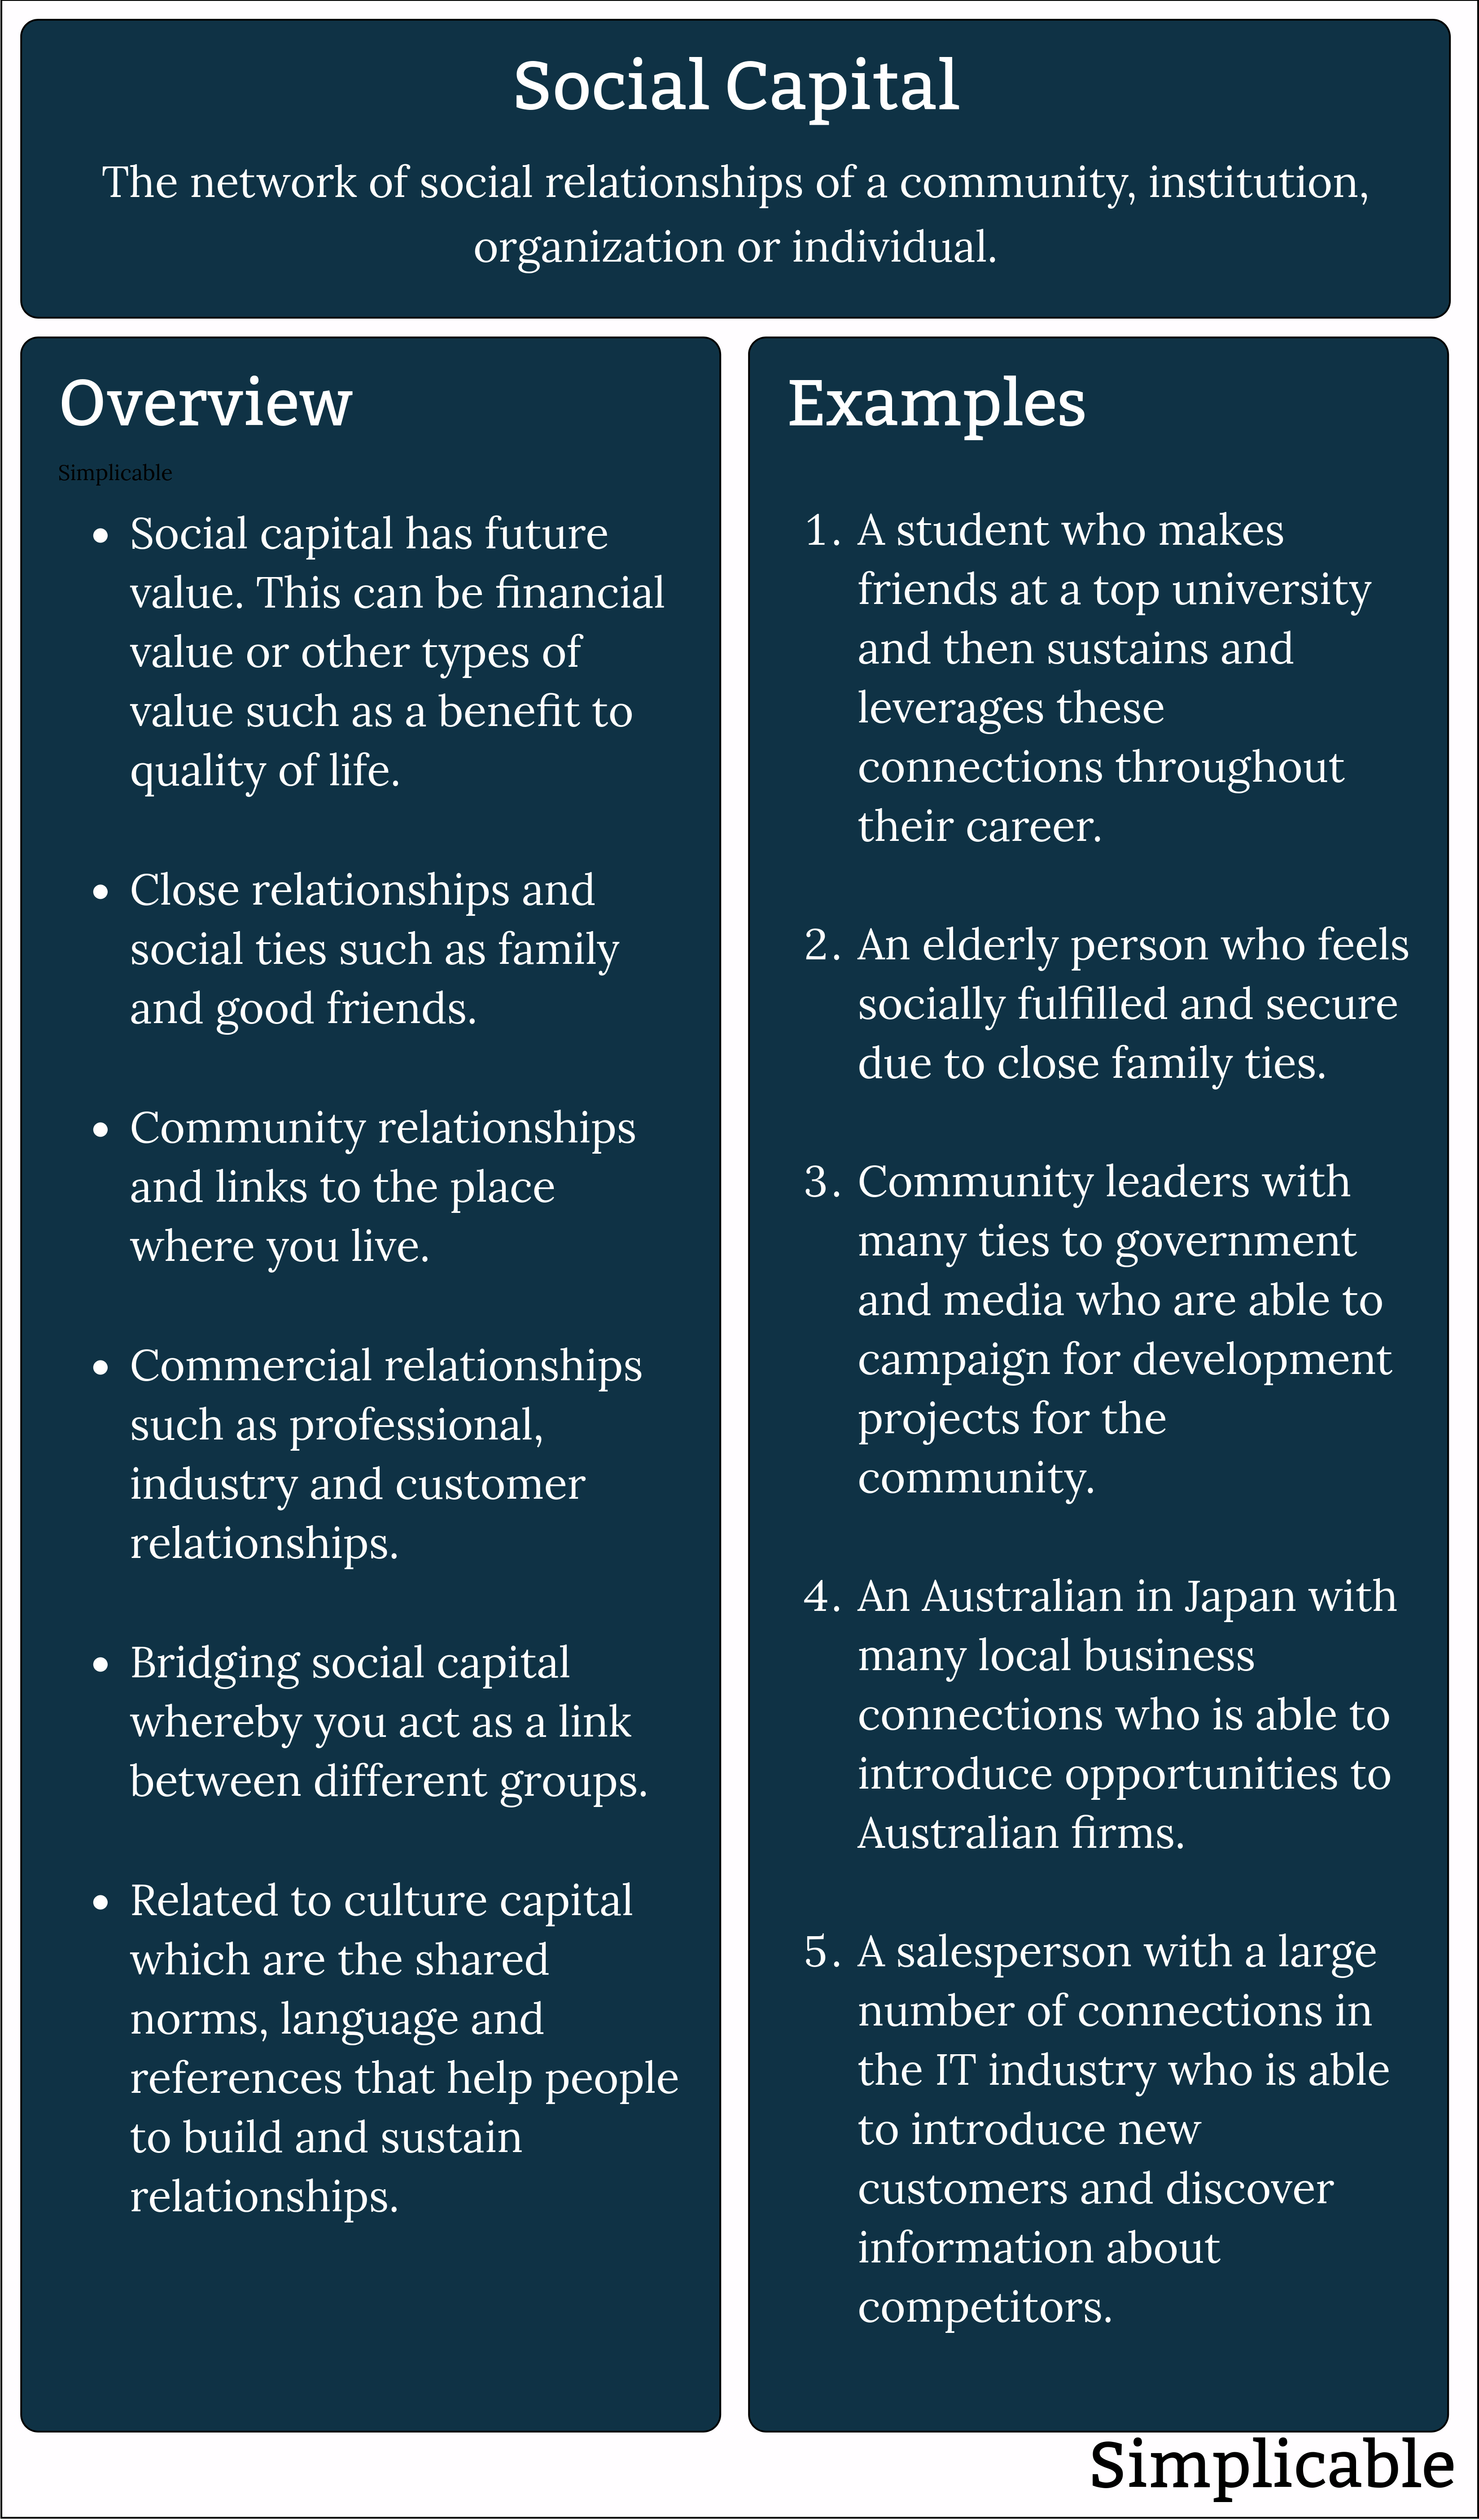 social capital overview and examples